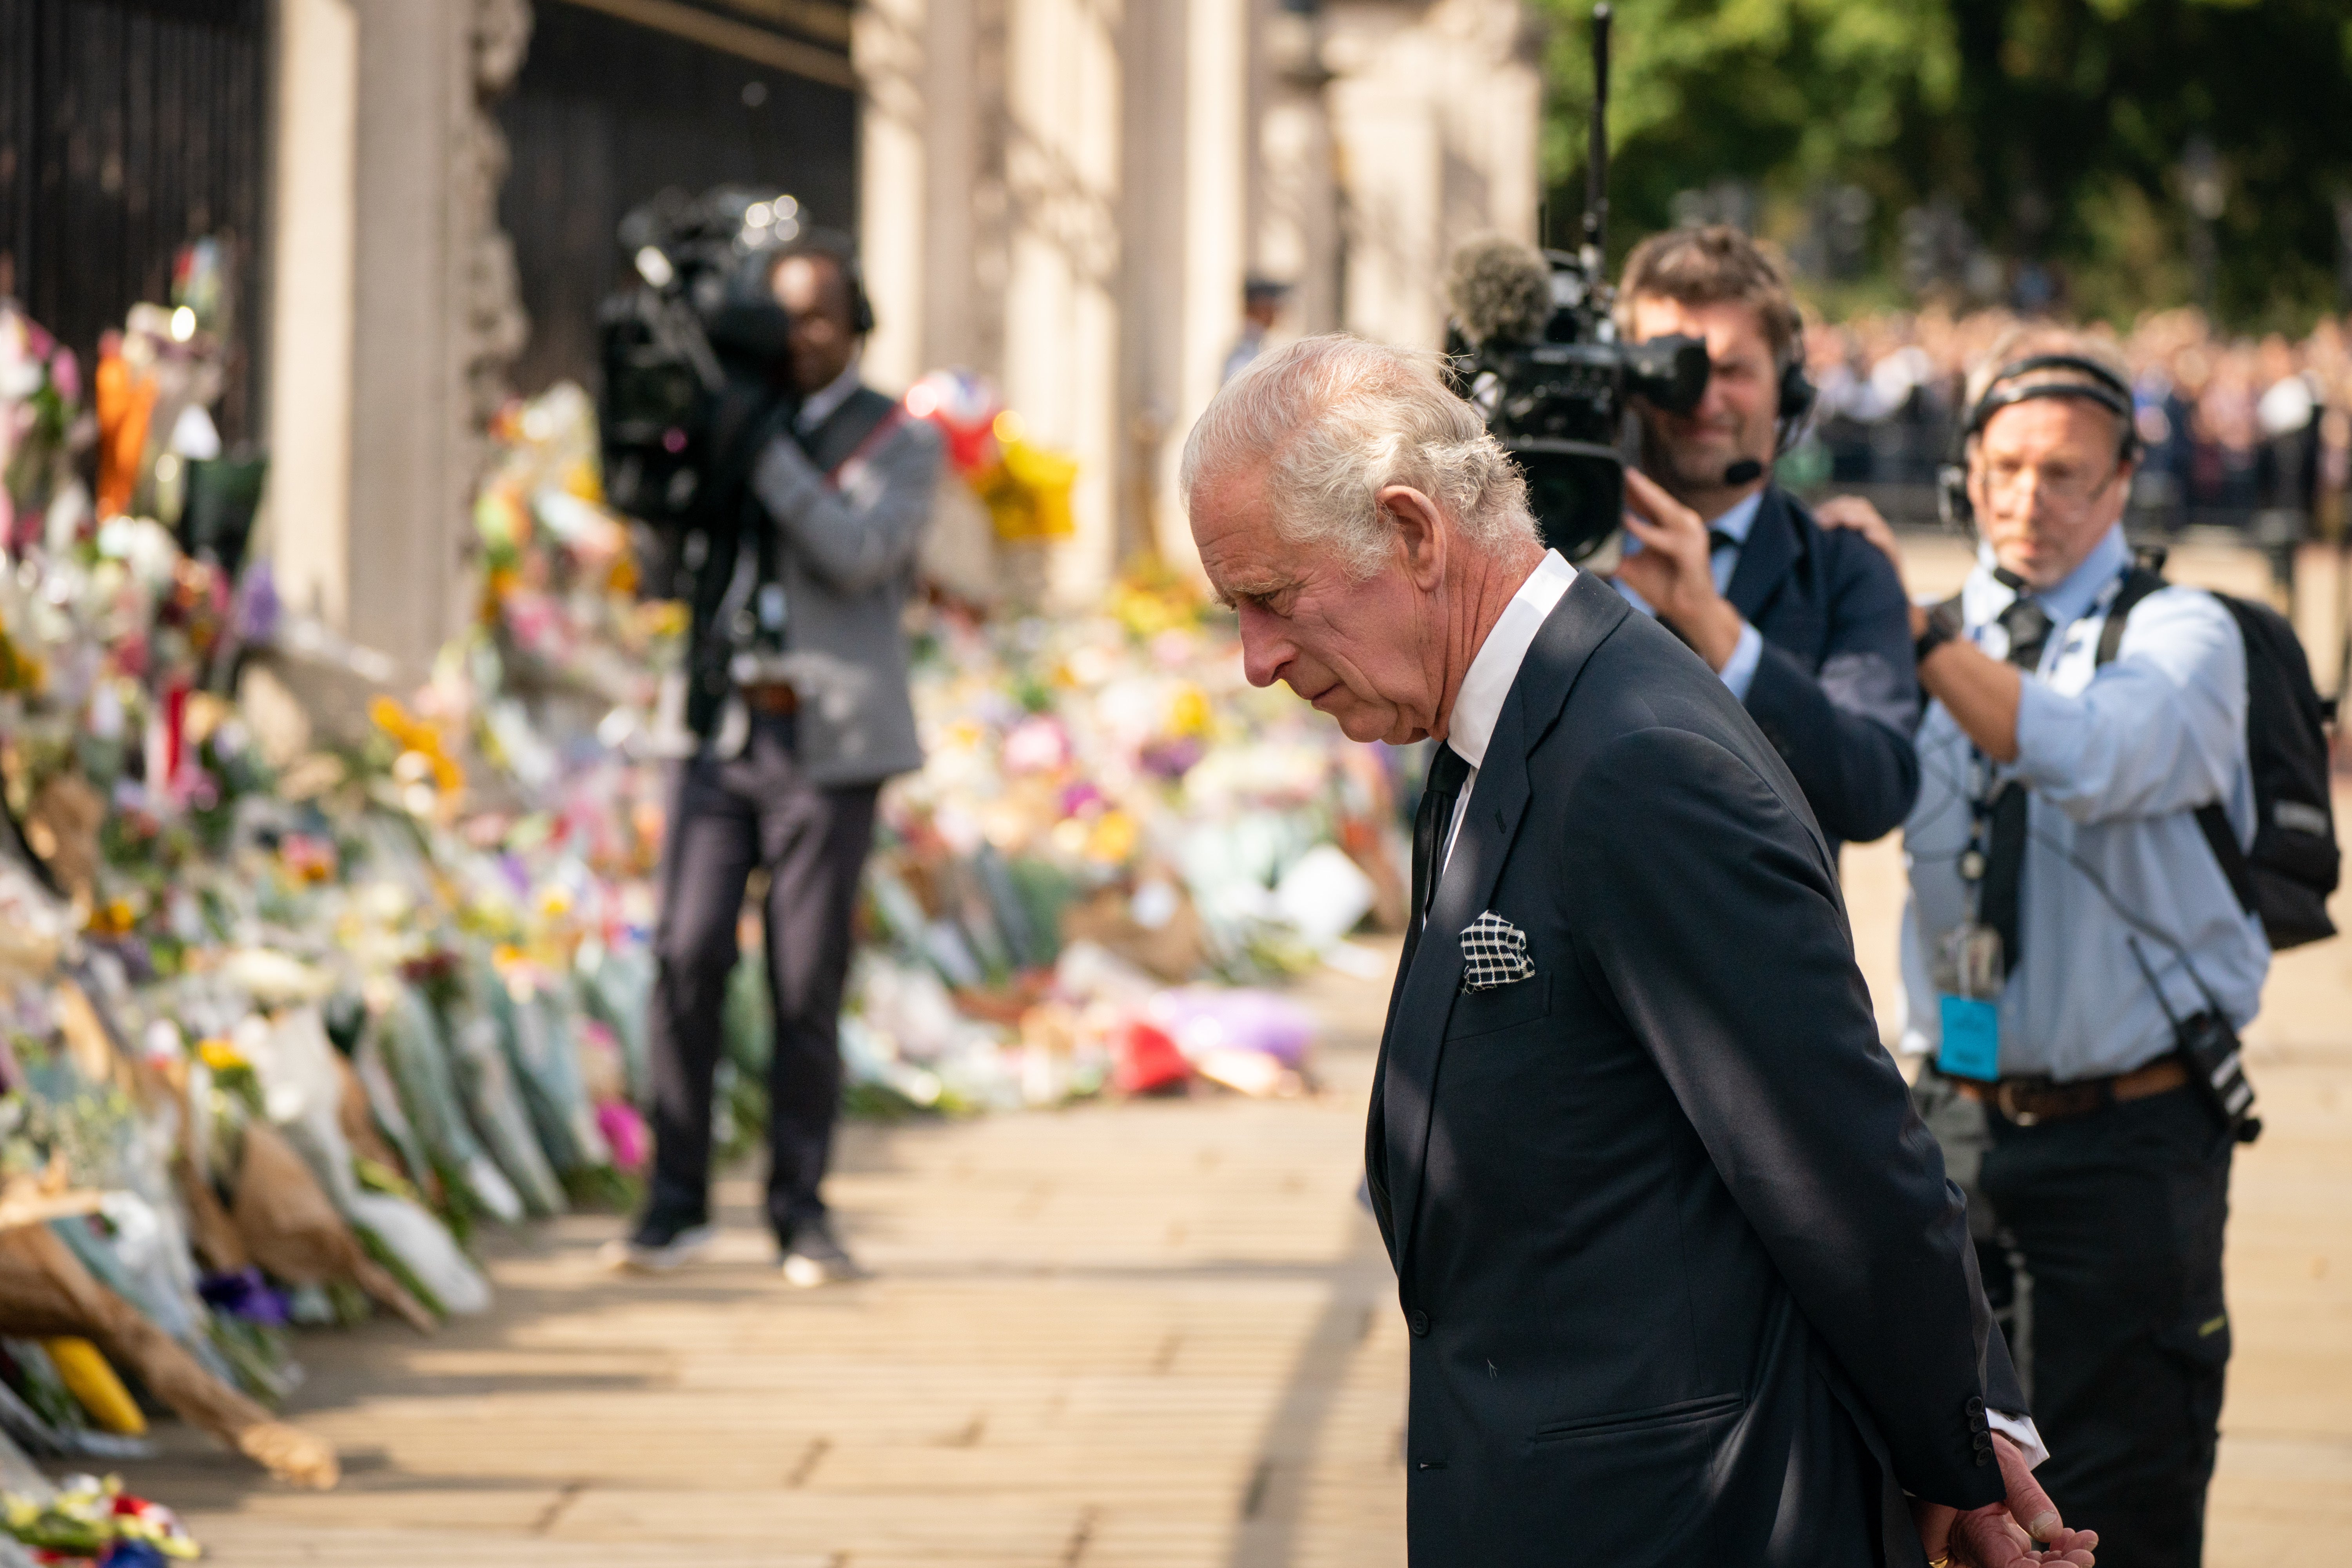 The King viewed floral tributes outside Buckingham Palace on Friday